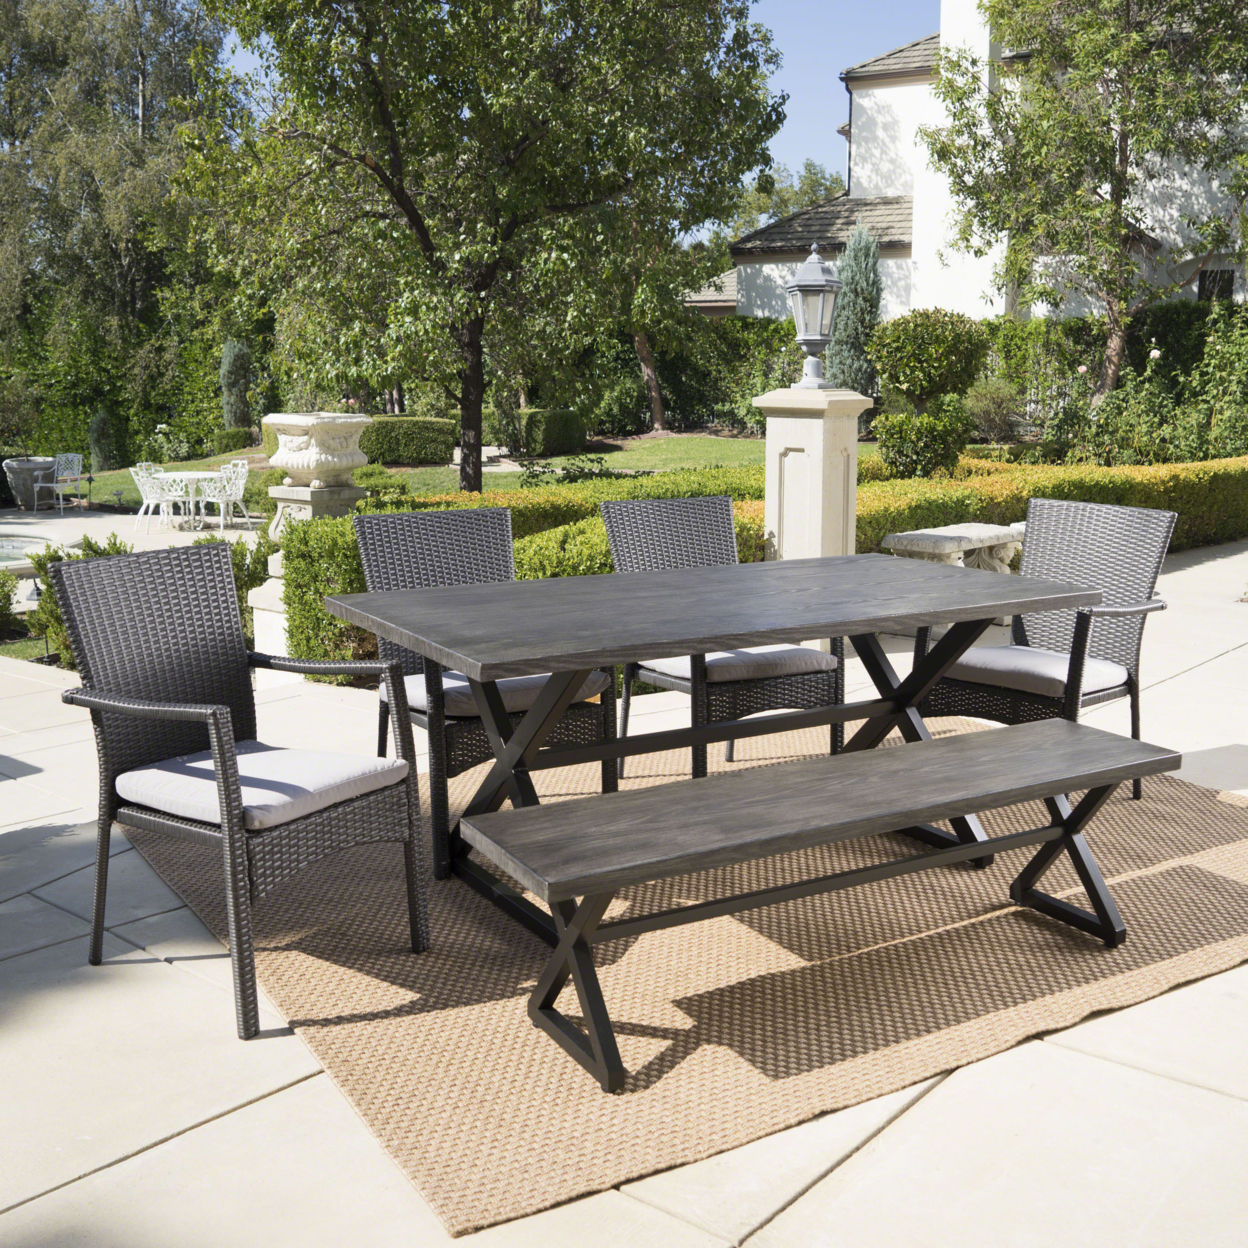 Tripoli Outdoor 6 Piece Aluminum Dining Set With Bench And Wicker Dining Chairs - Gray/Gray